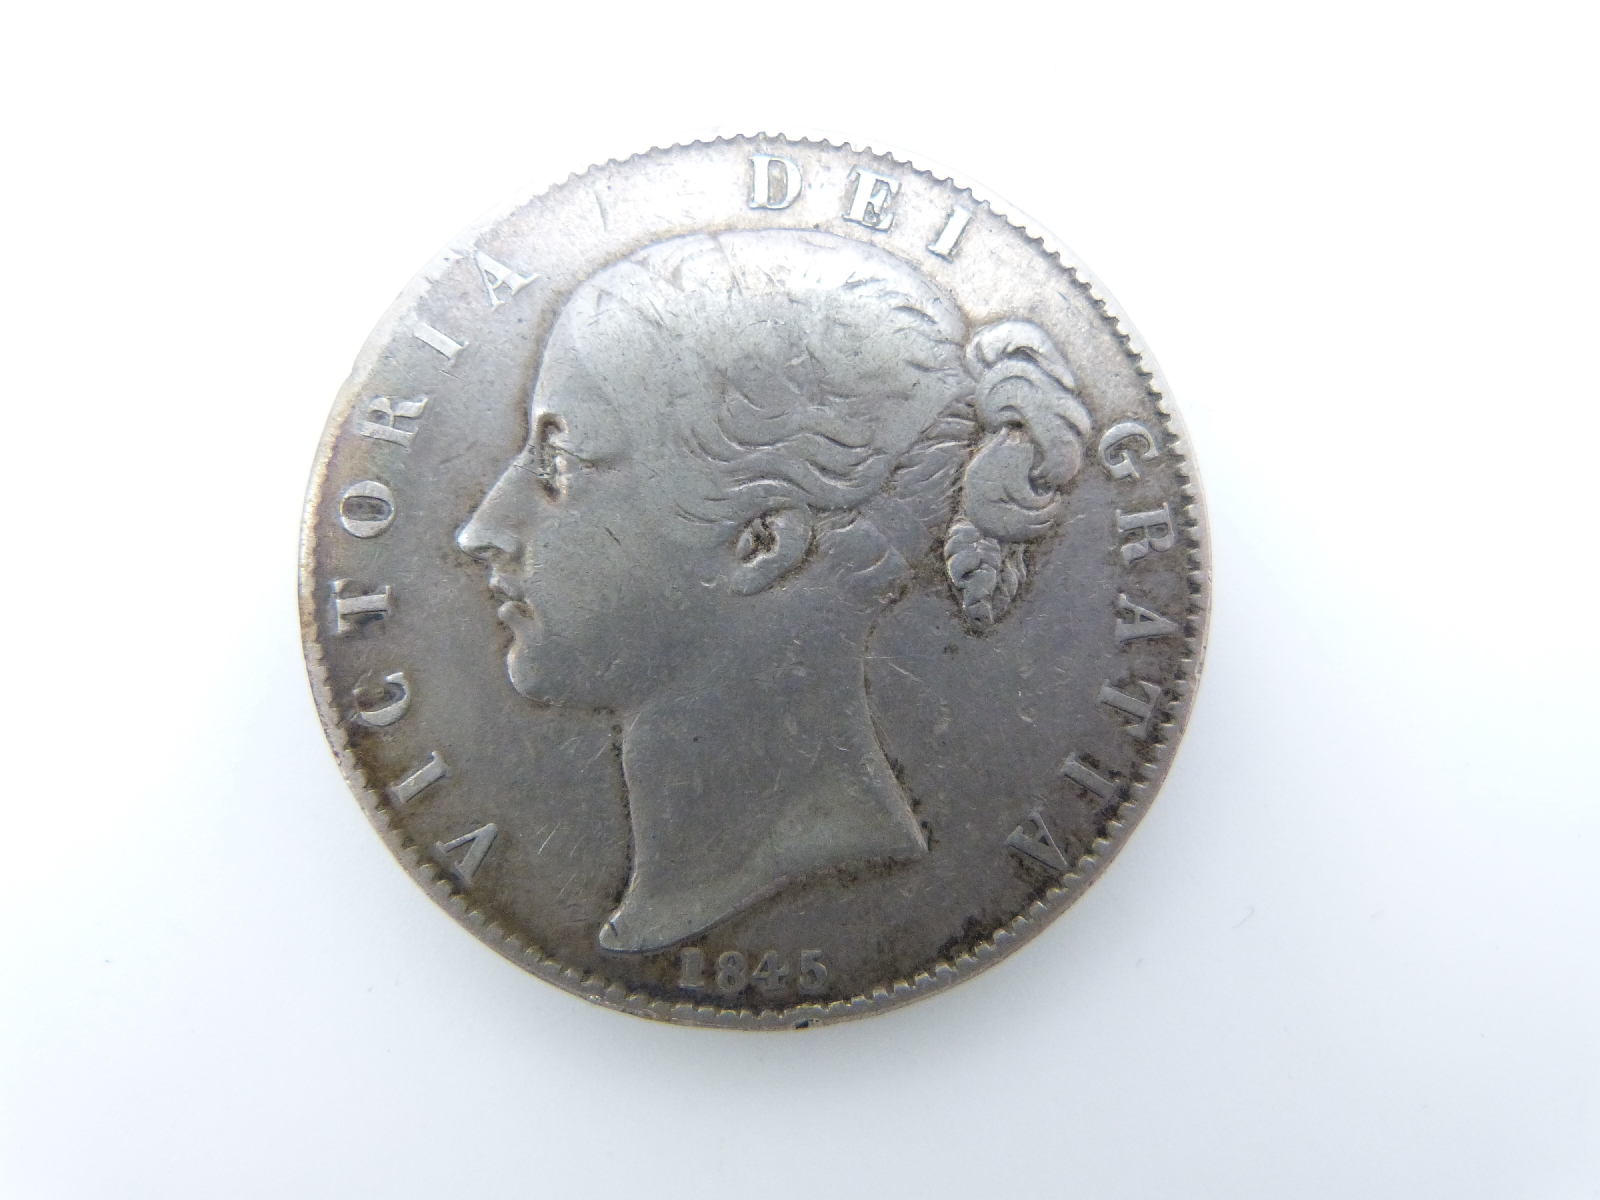 1845 young head Victorian wreath crown, an 1899 veiled head and a Jubilee double florin - Image 4 of 7